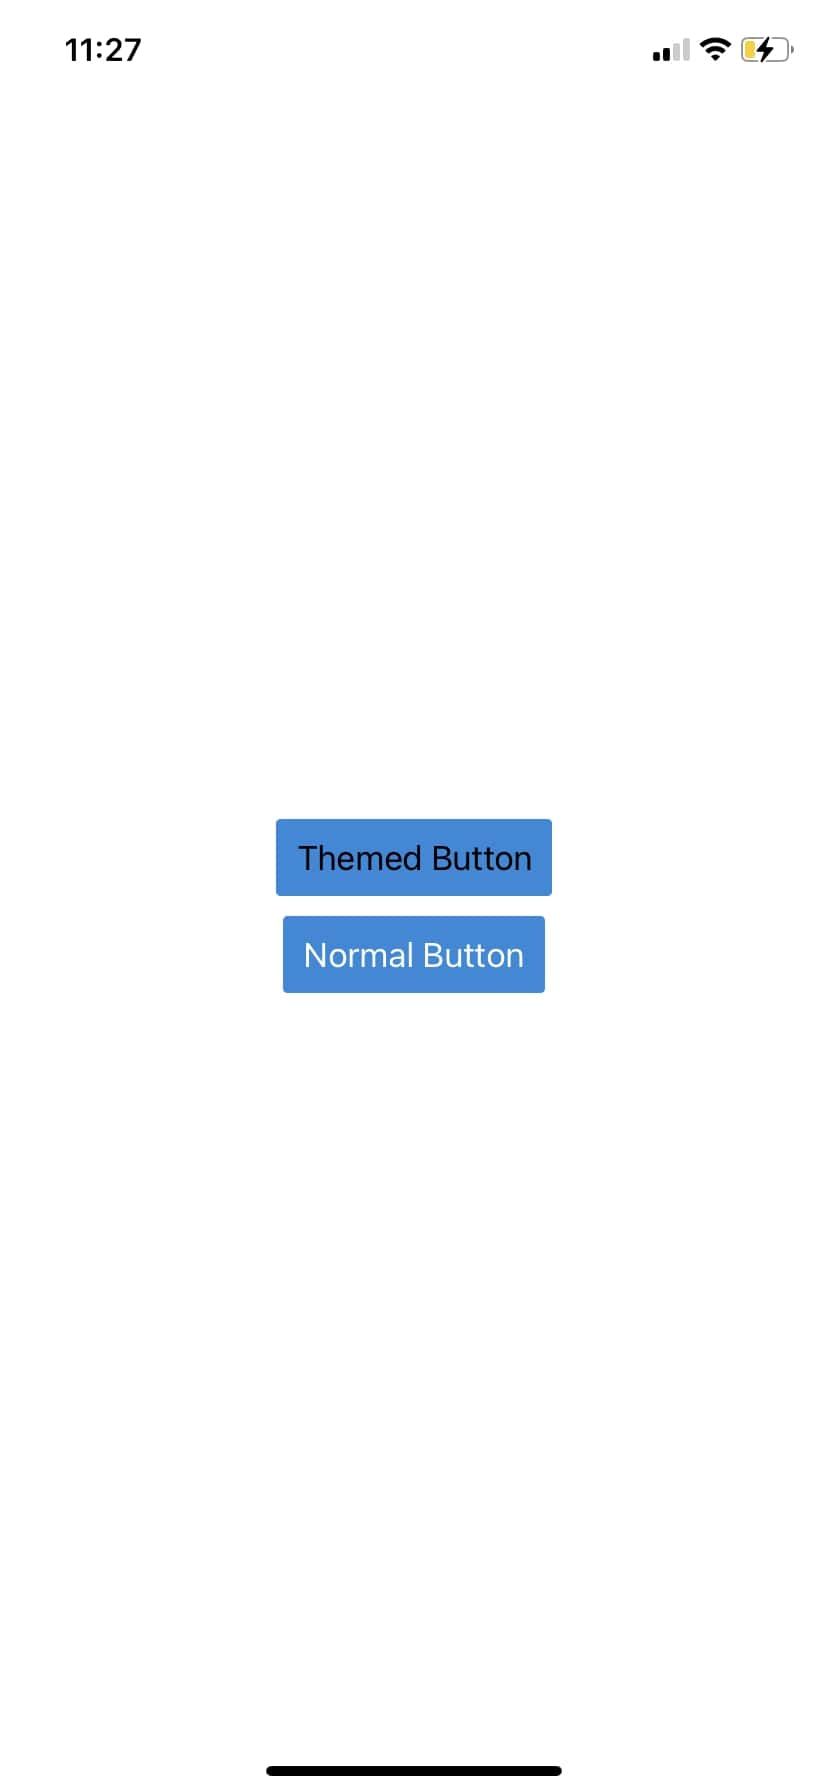 A mobile screenshot of a theme styled button component created with React Native Elements